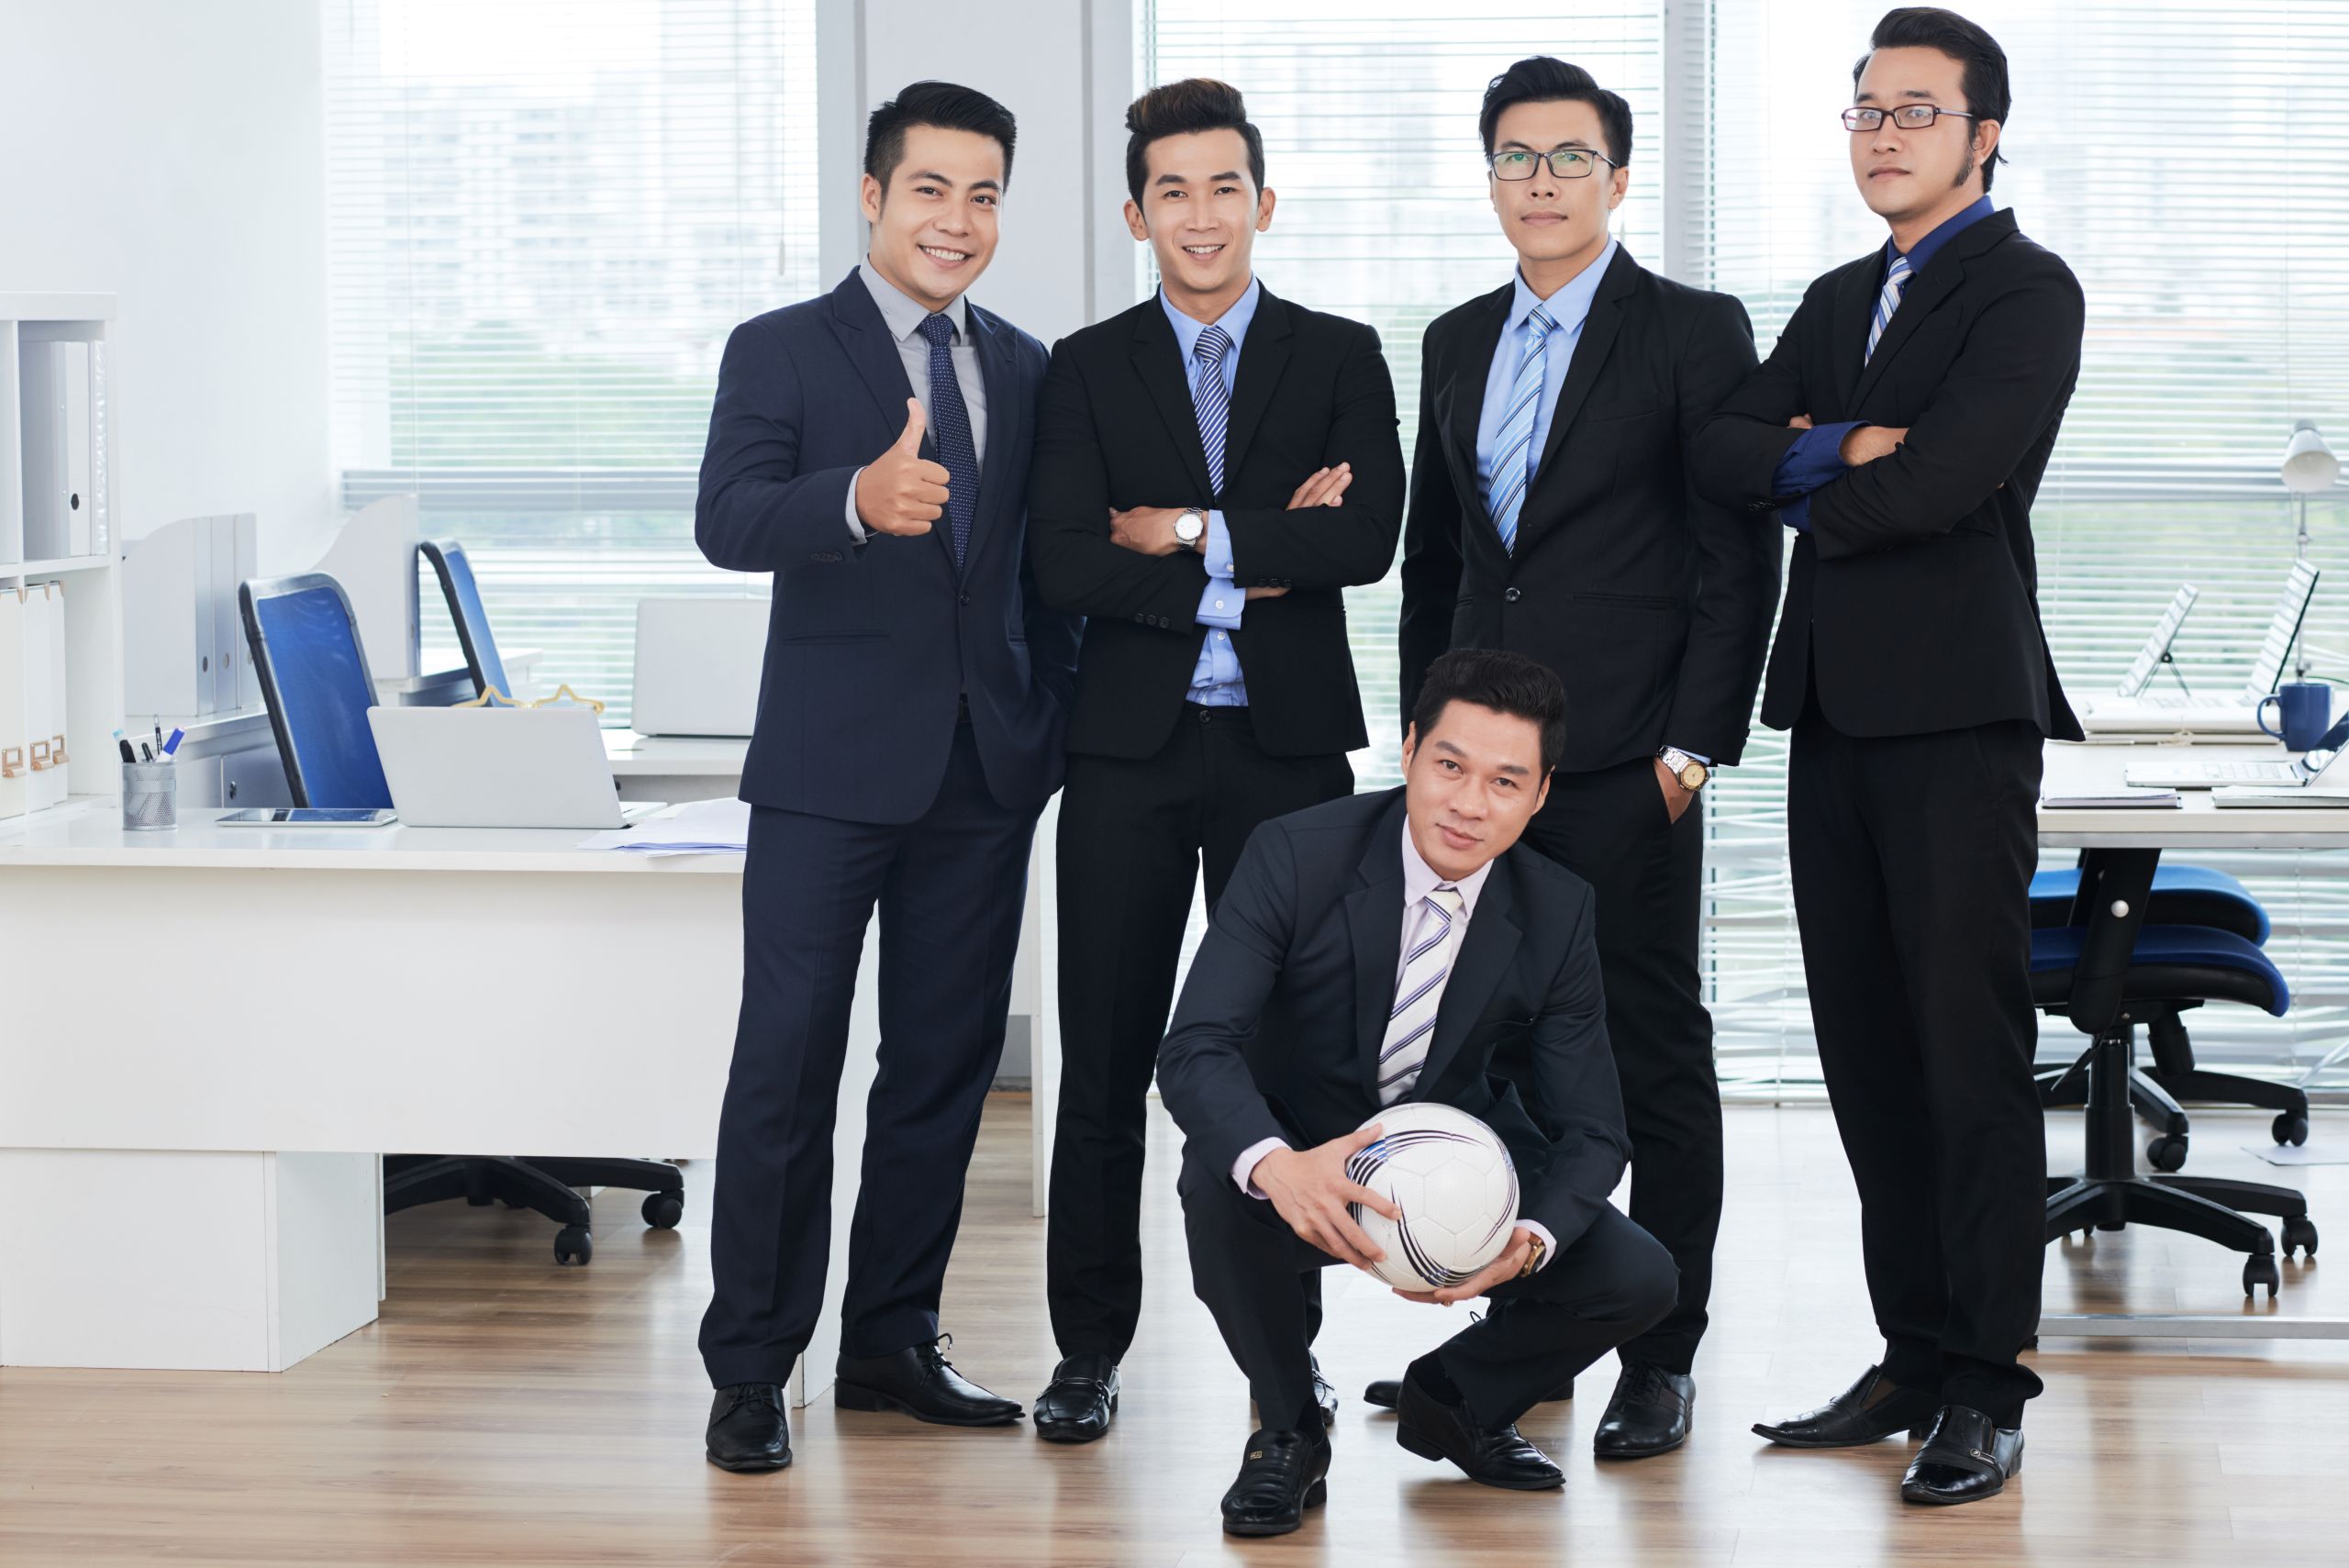 Smiling Asian managers wearing classical suits posing for photography while standing at open plan office, one of them crouching and holding soccer ball in hands